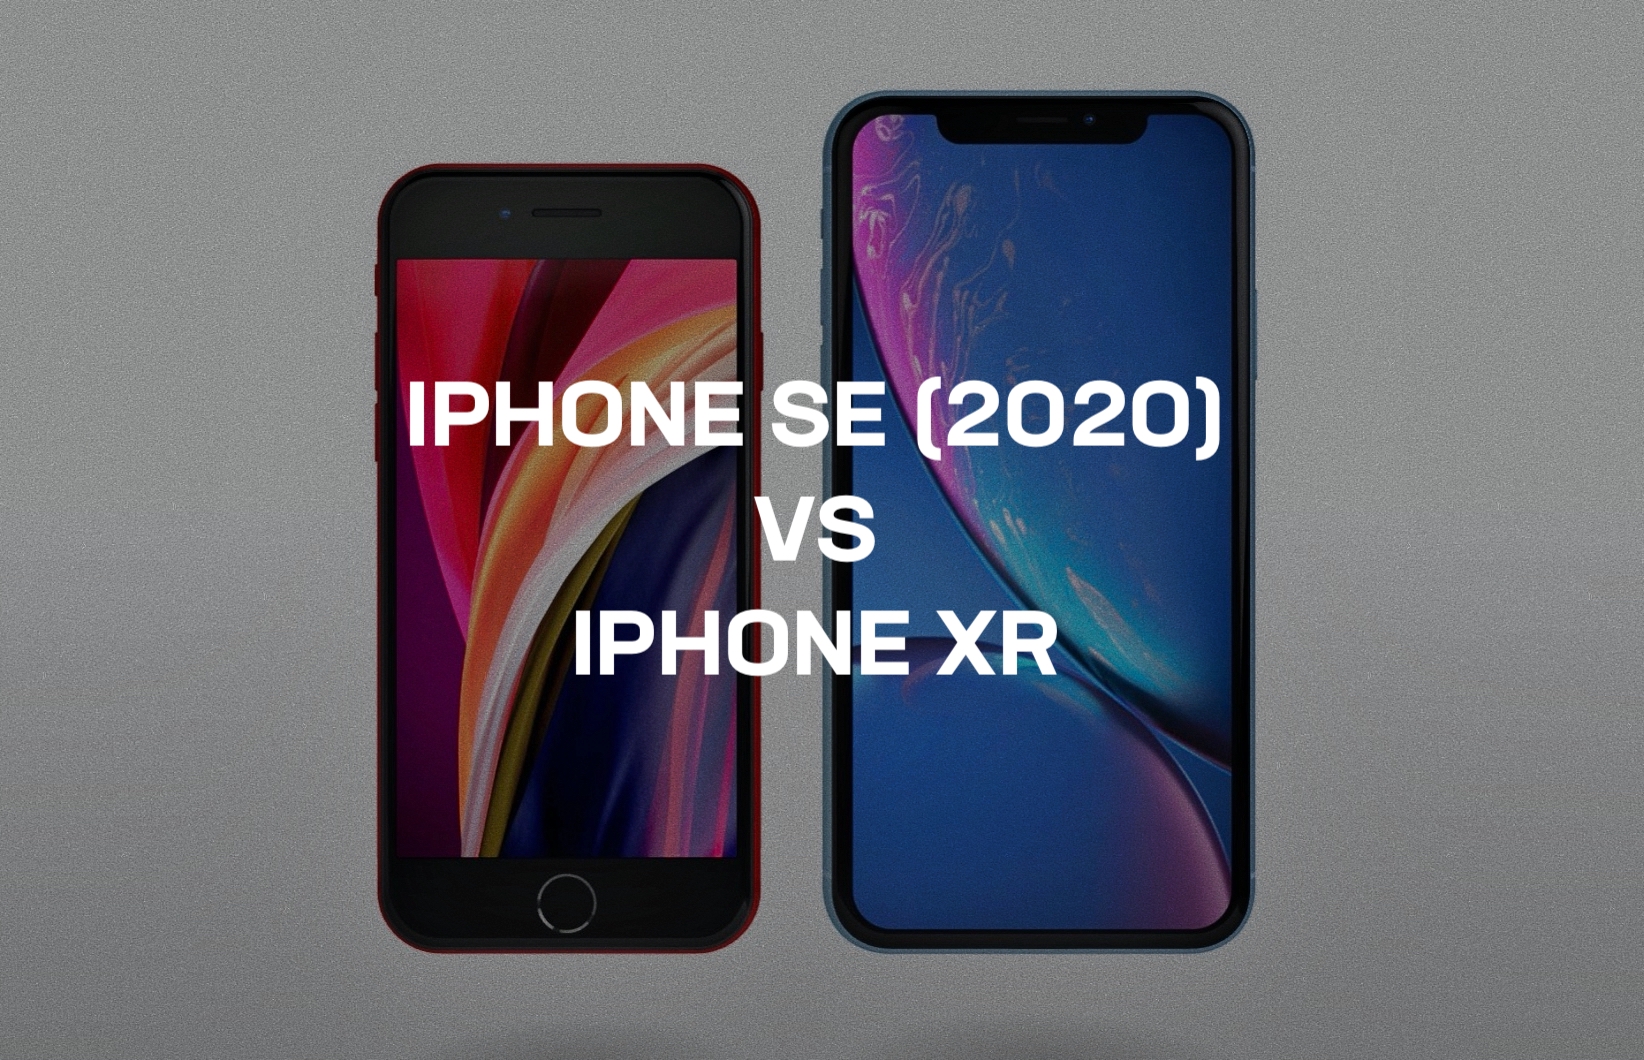 iPhone SE (2020) vs iPhone XR: Which is a better buy?